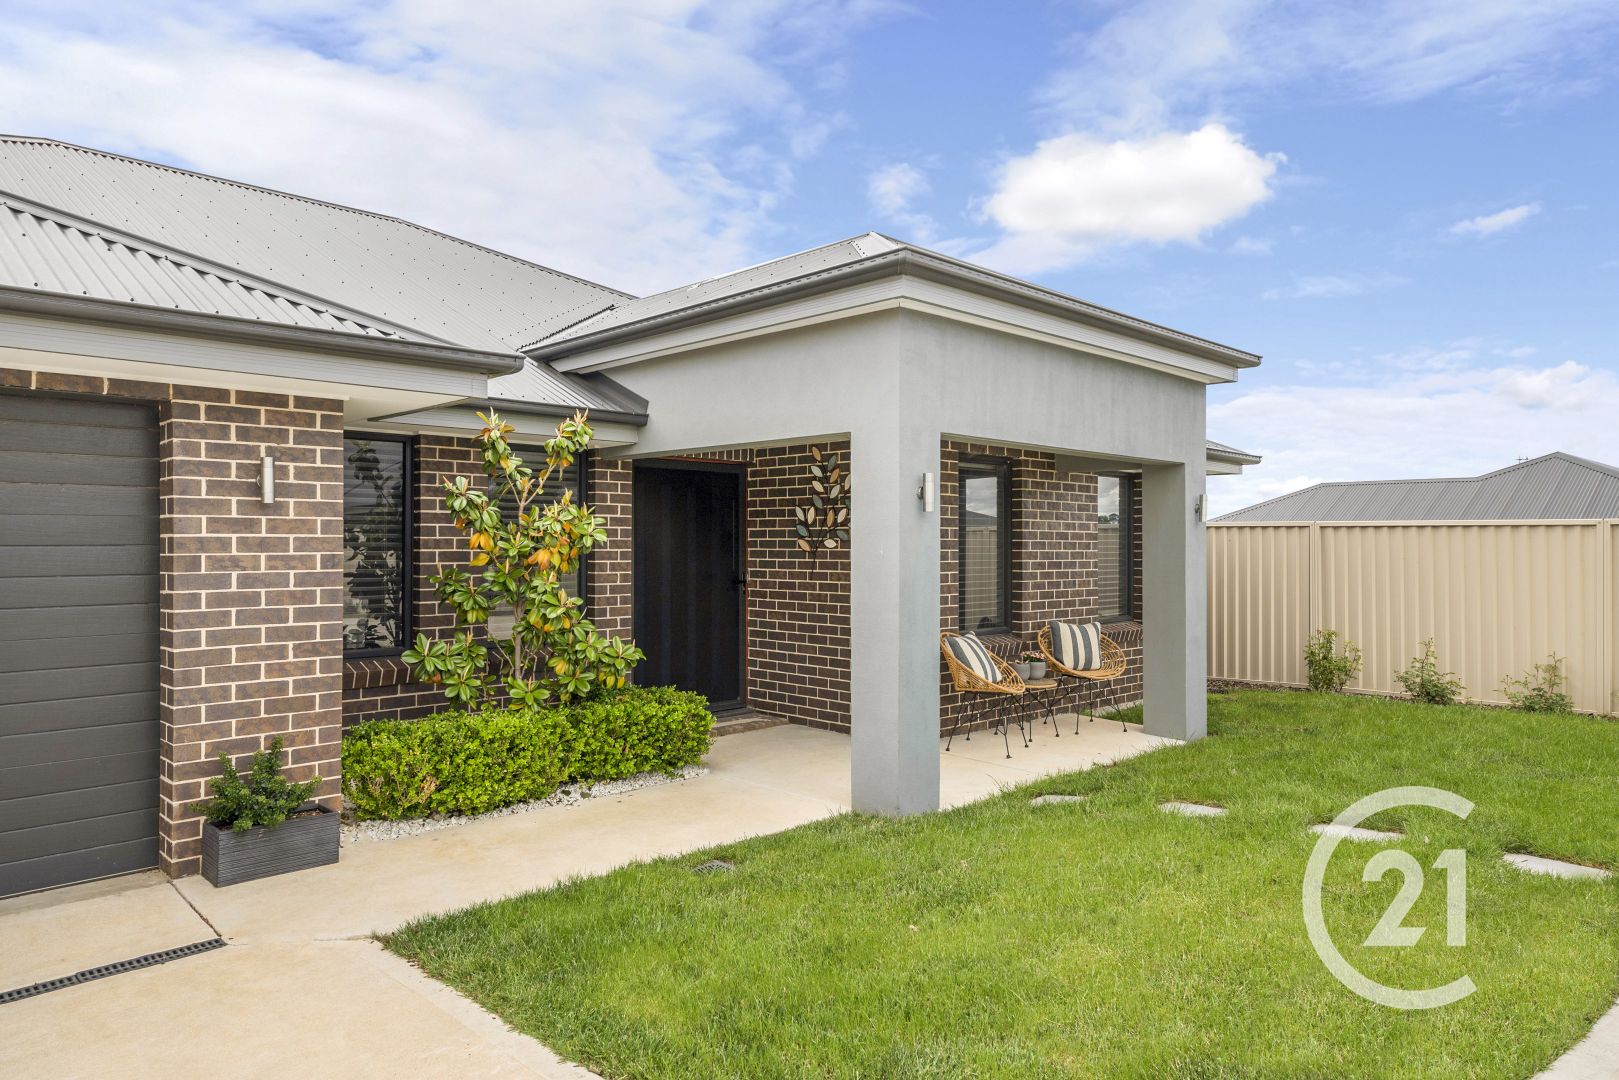 12 Cheviot Drive, Kelso | Property History & Address Research | Domain